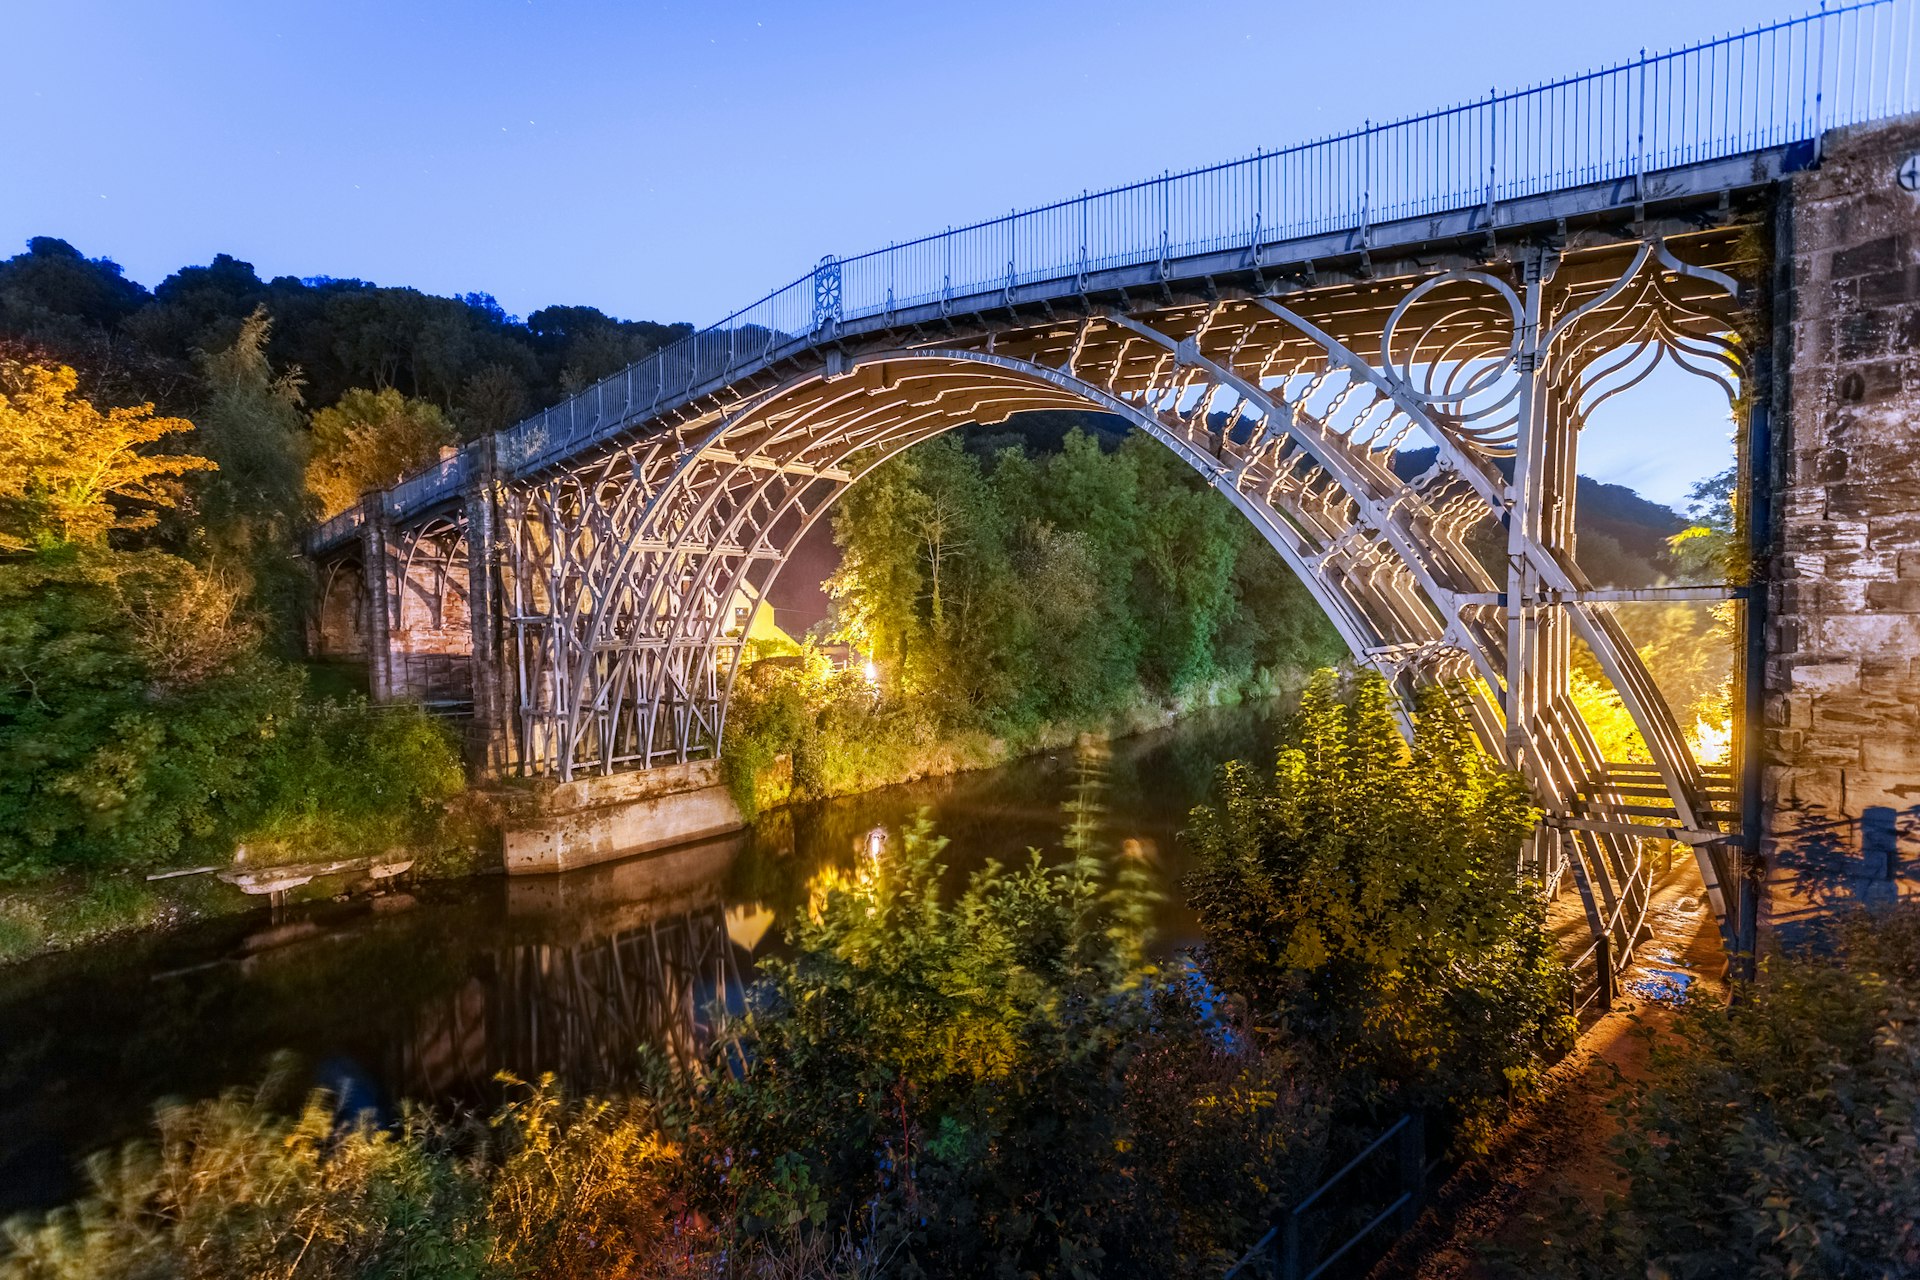 A huge iron bridge spans a gorge; it's shot at dusk with a blue hue to the surrounding light